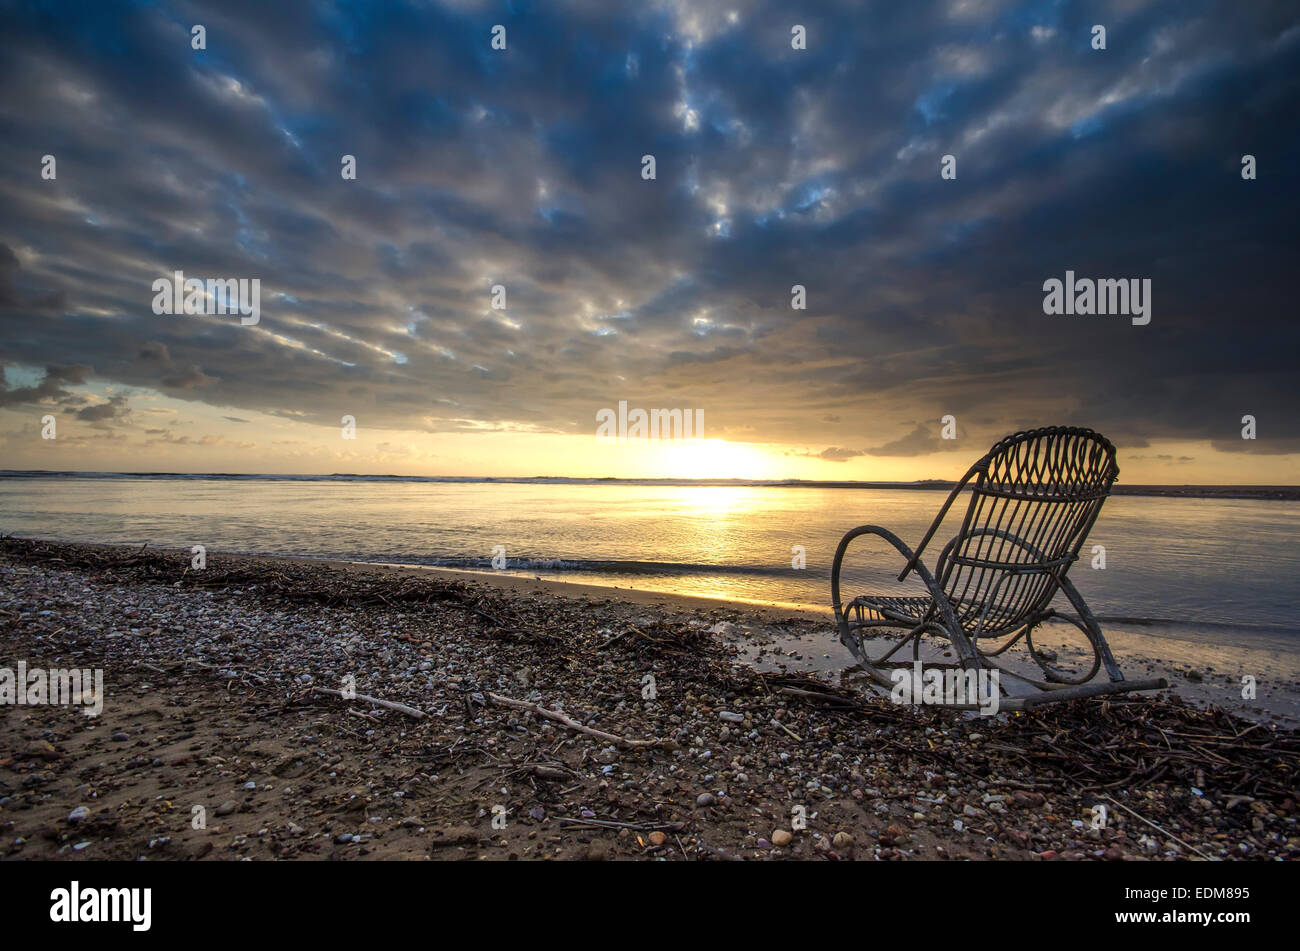 A empty chair stand on beach with view on sunset Greece Stock Photo